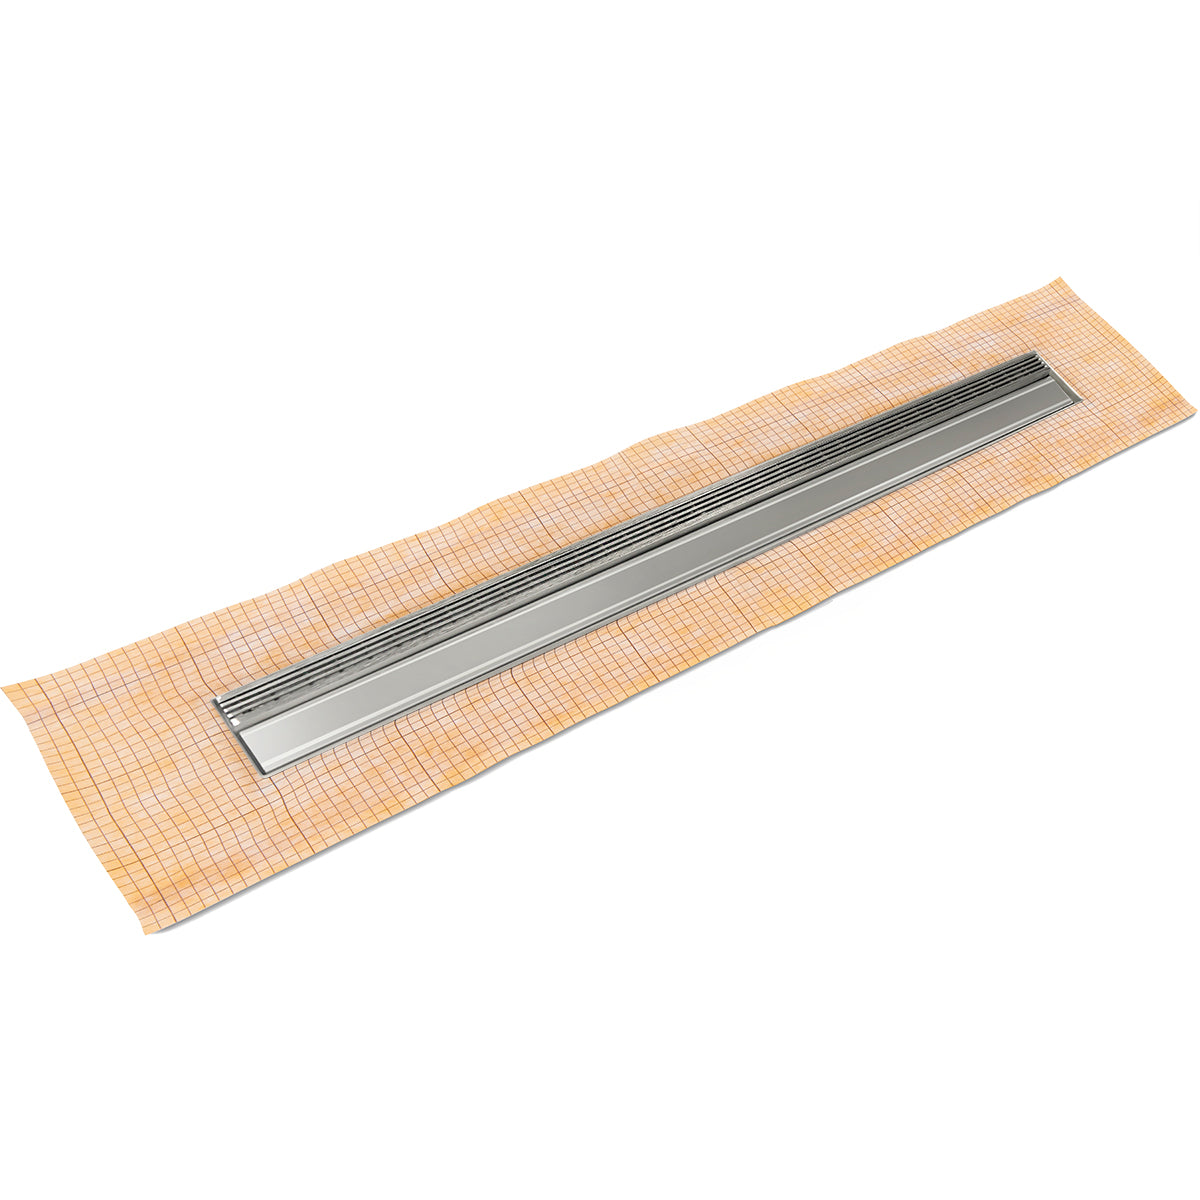 Infinity Drain 48" FCS Series Schluter-Kerdi - Fixed Flange Linear Drain Kit with 1" Wedge Wire Grate